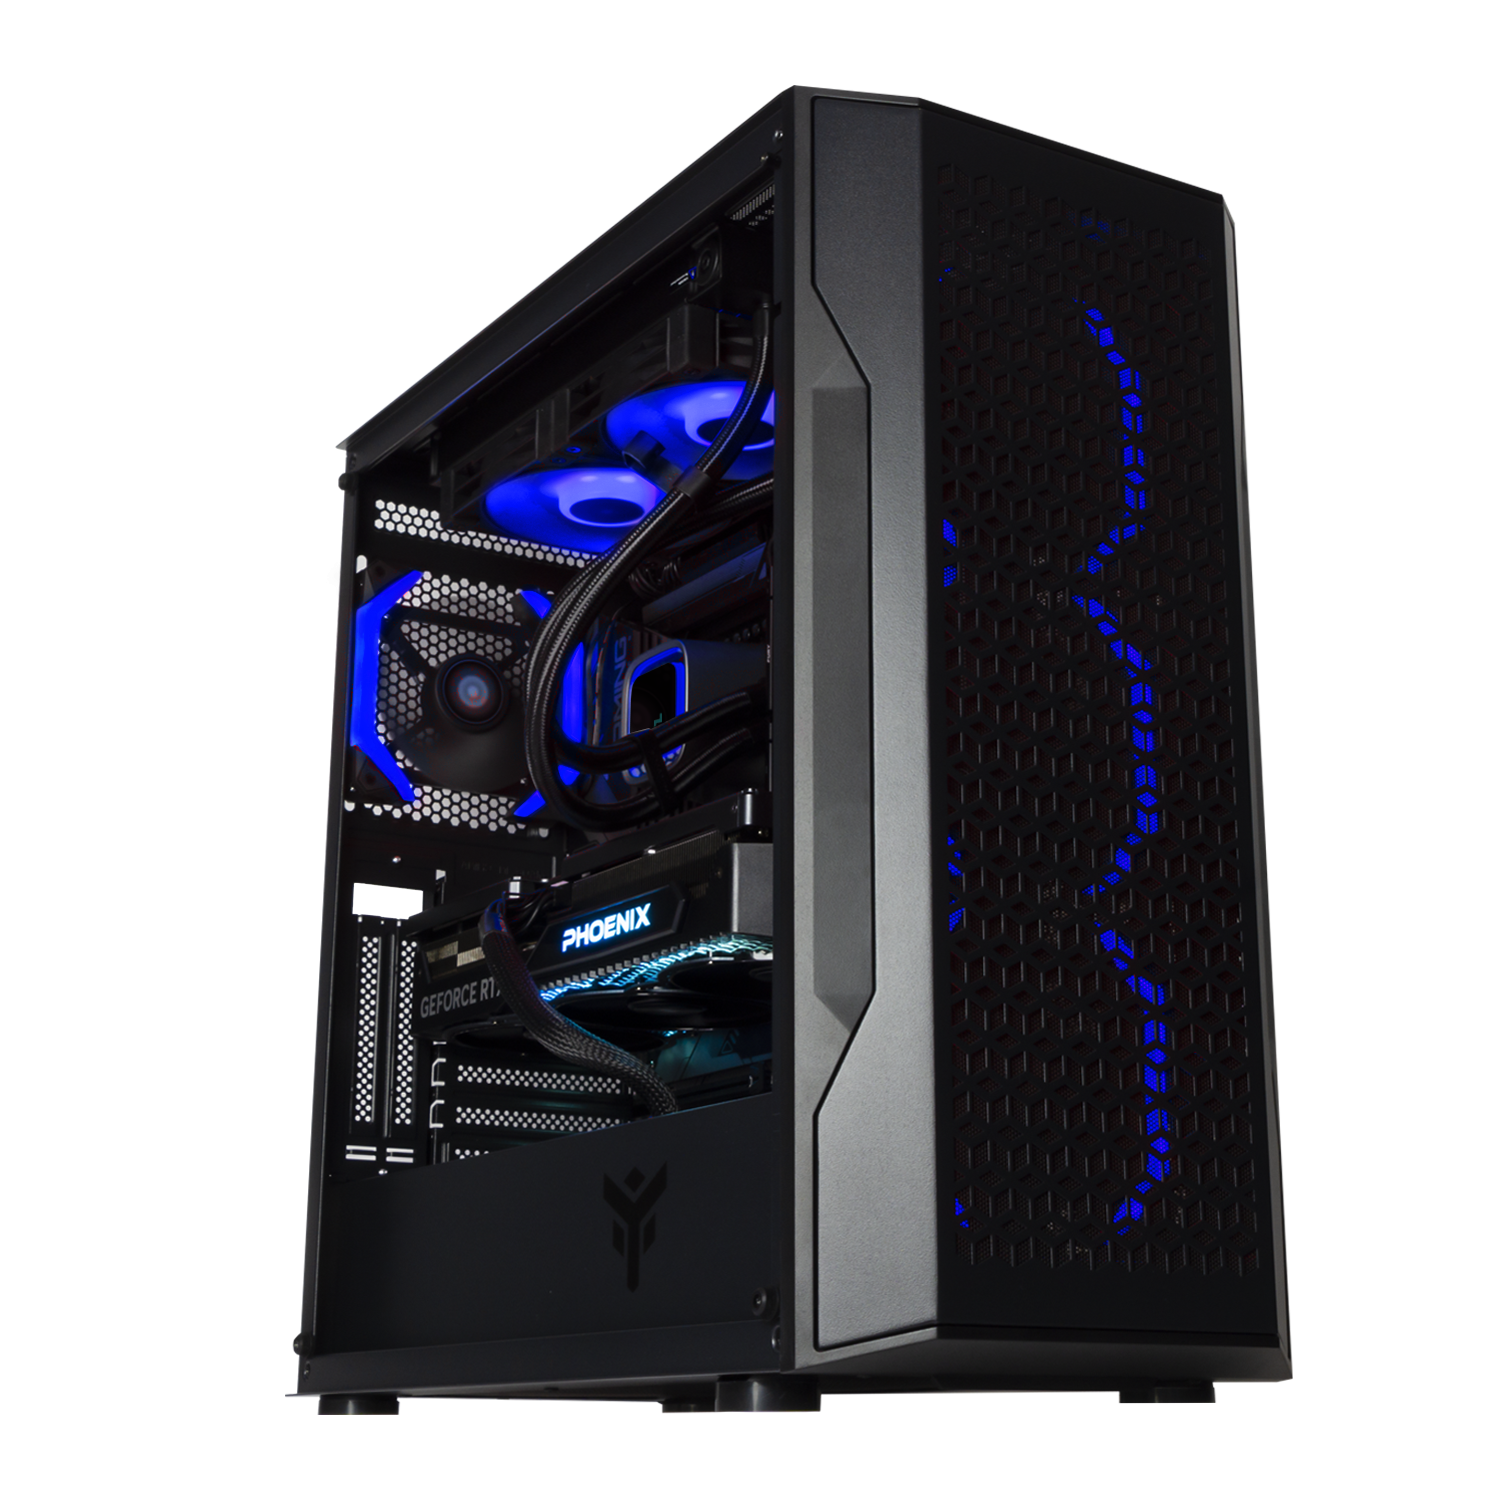 GAMING PC i7 11700K up to 5.00 GHz, NVIDIA RTX 3080 10GB, RAM 16GB 3200MHz, SSD 500GB NVMe + HDD 1000GB, LIQUID COOLER 240mm, WIN 11 PRO